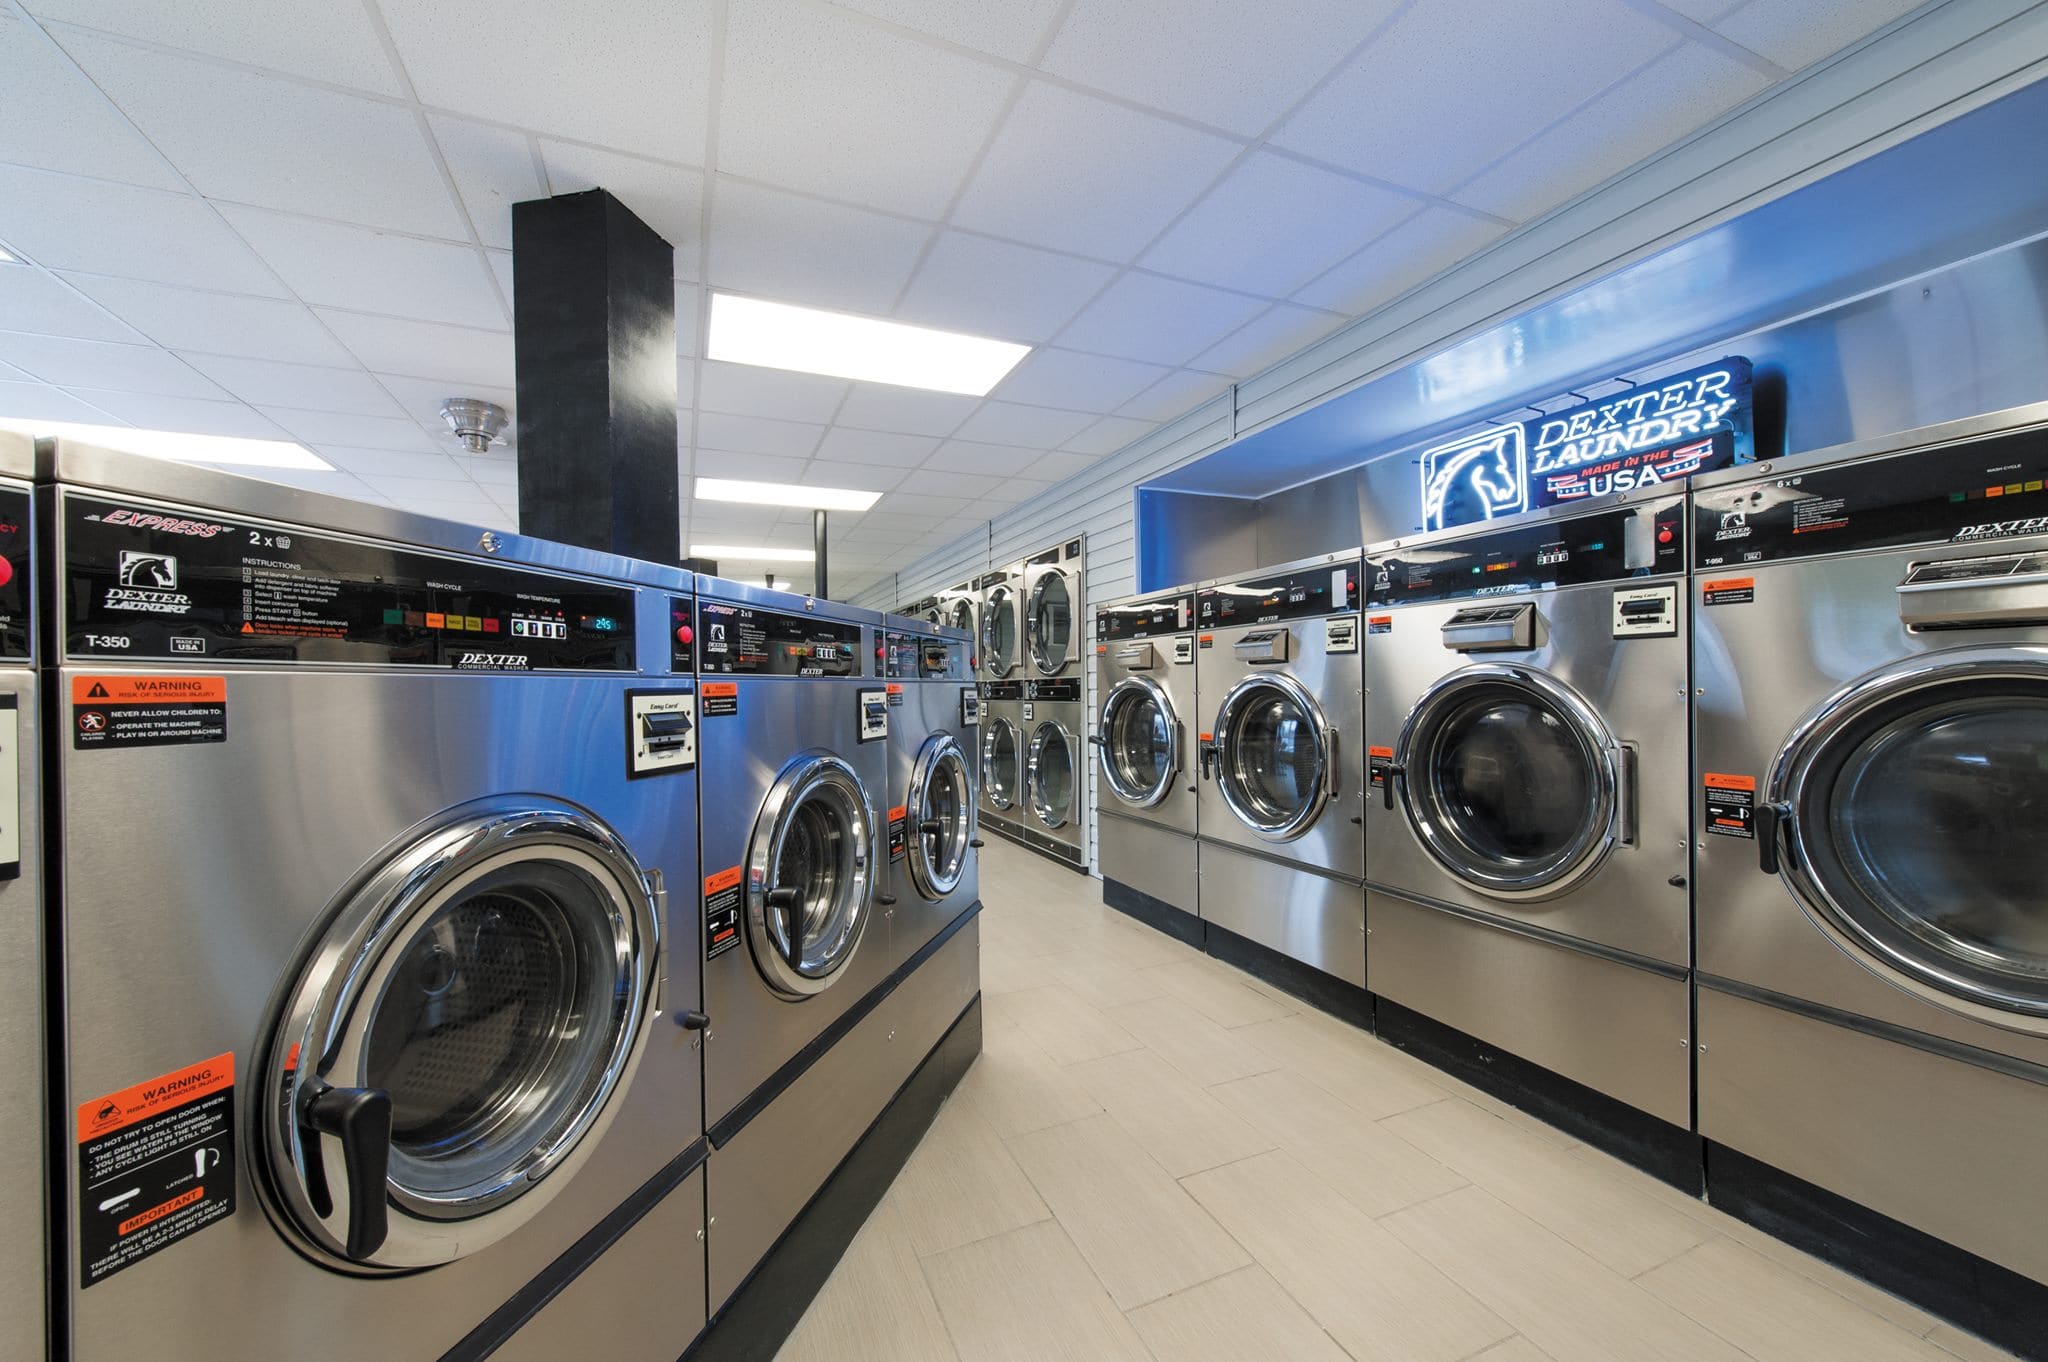 Dexter Laundry differentiated its products from the competition by connecting their machines to the IoT.